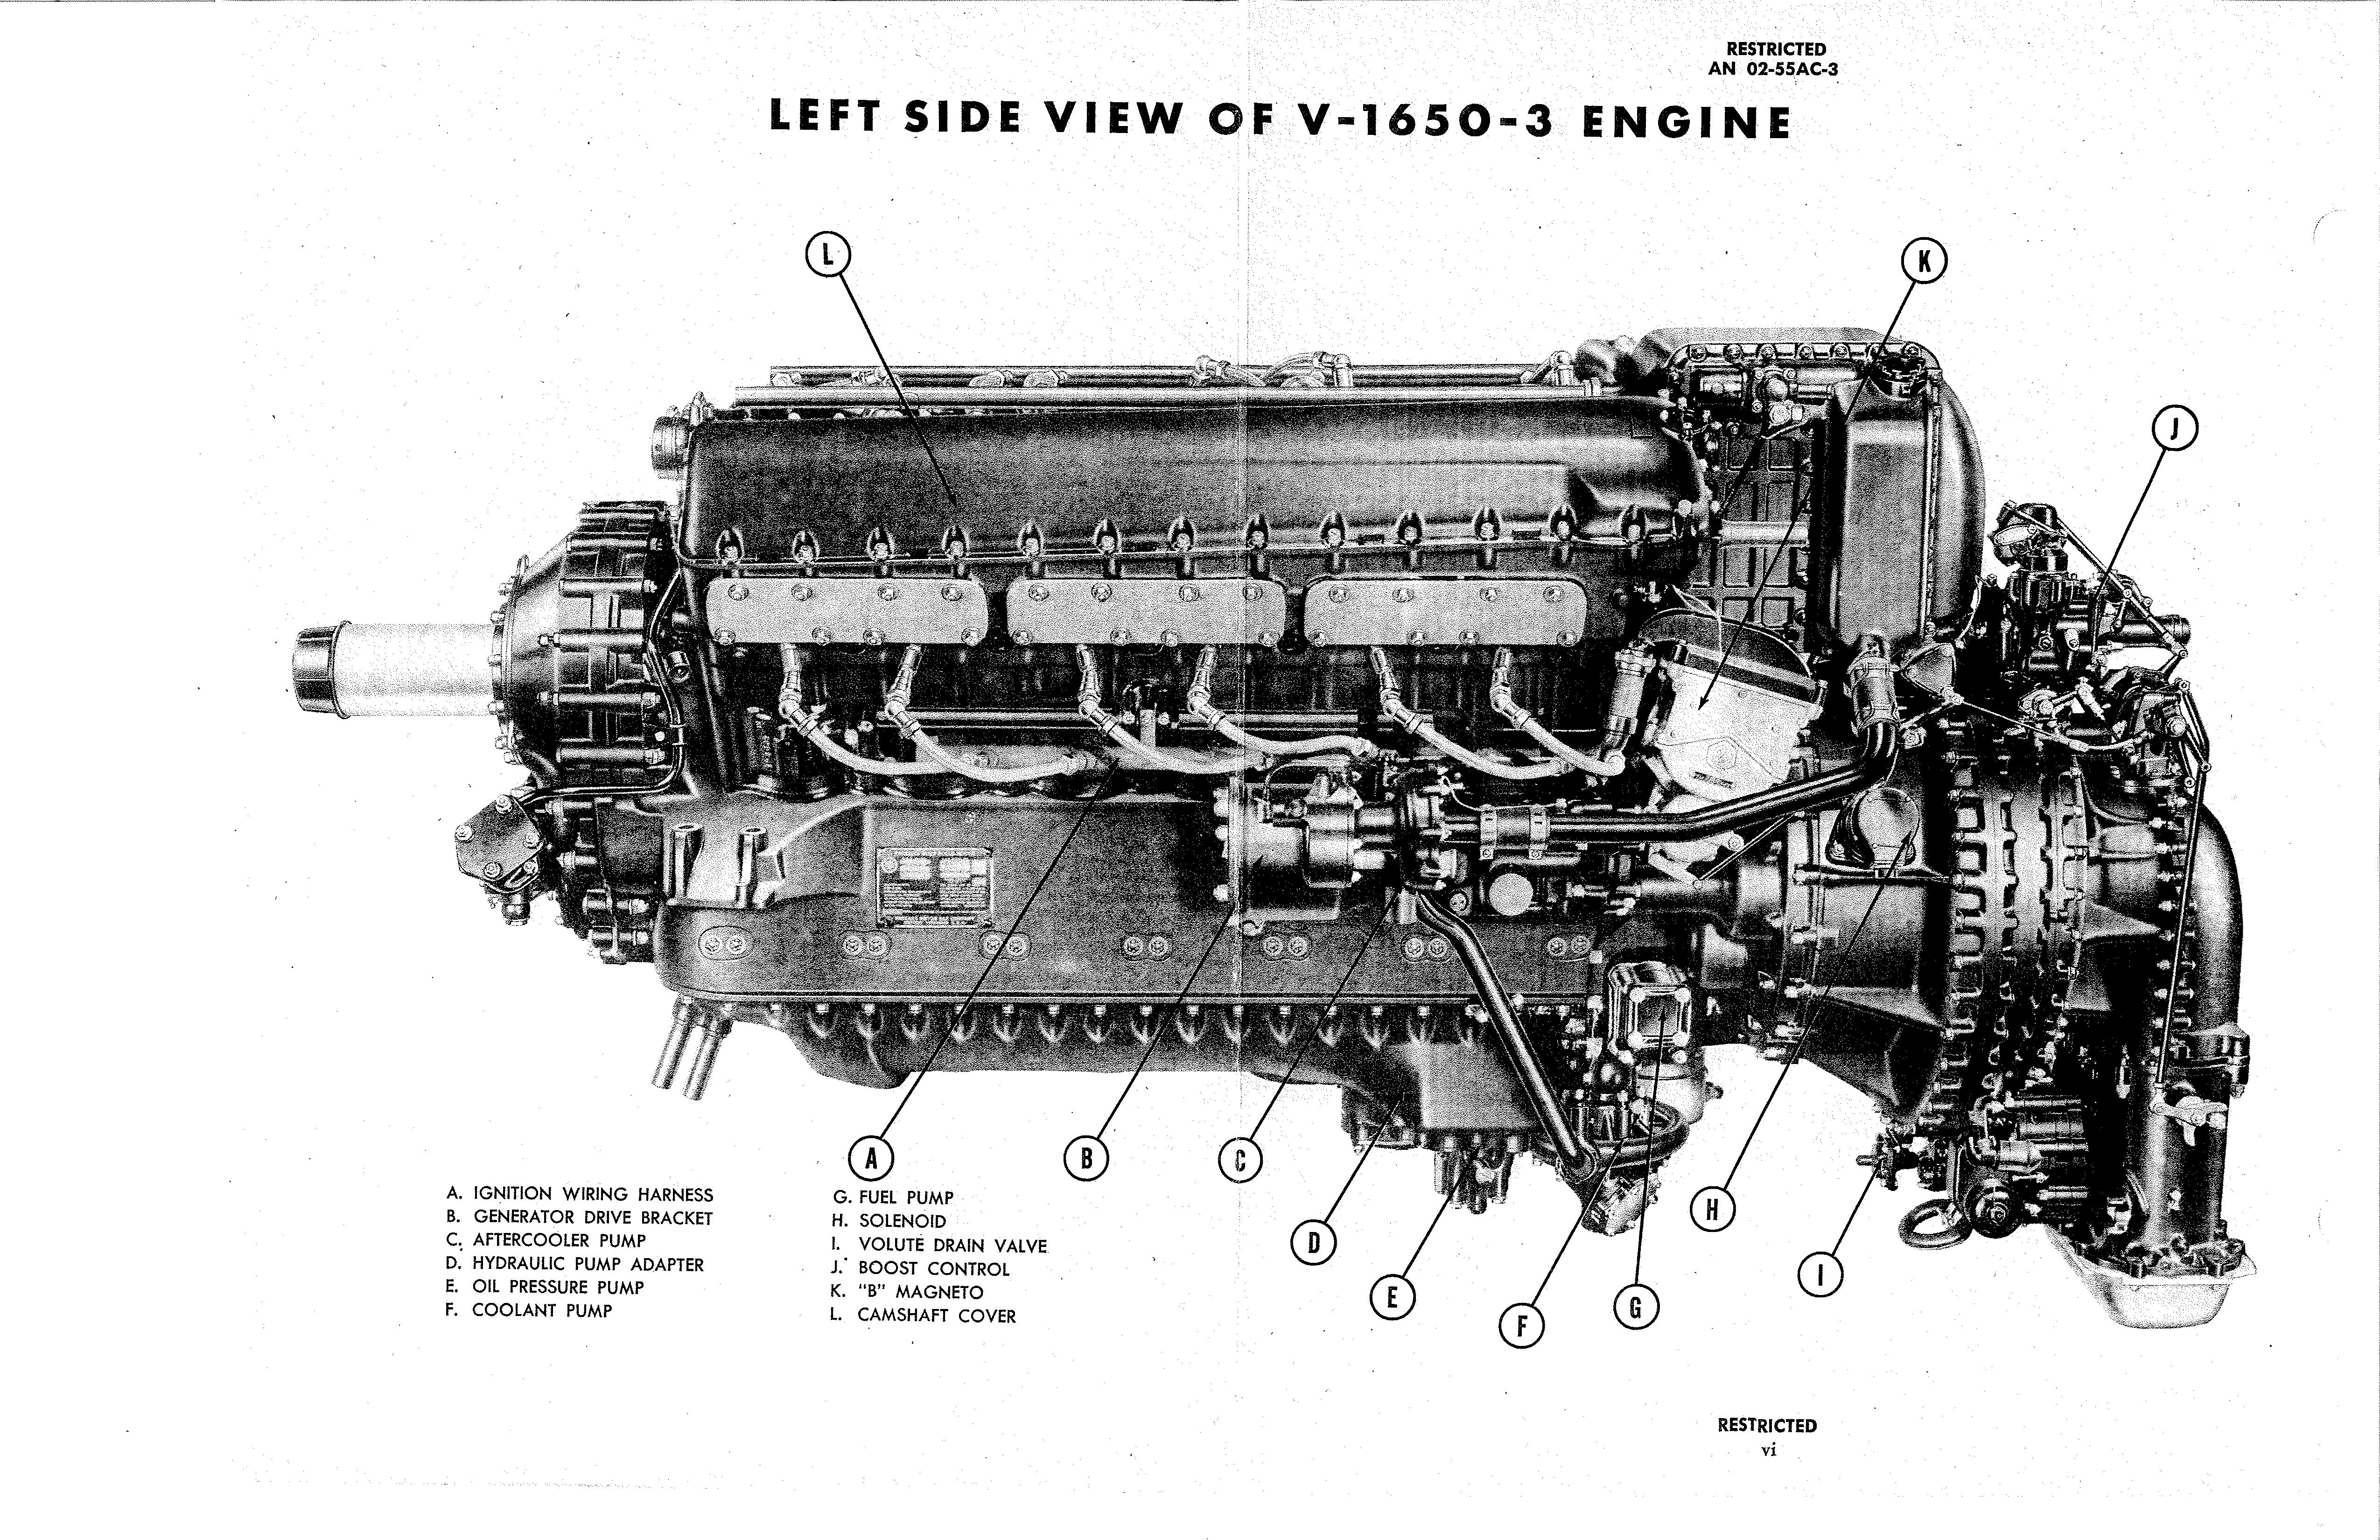 Sample page 8 from AirCorps Library document: Overhaul Instructions for V-1650-3, -7, and Merlin 68 and 69 Engines